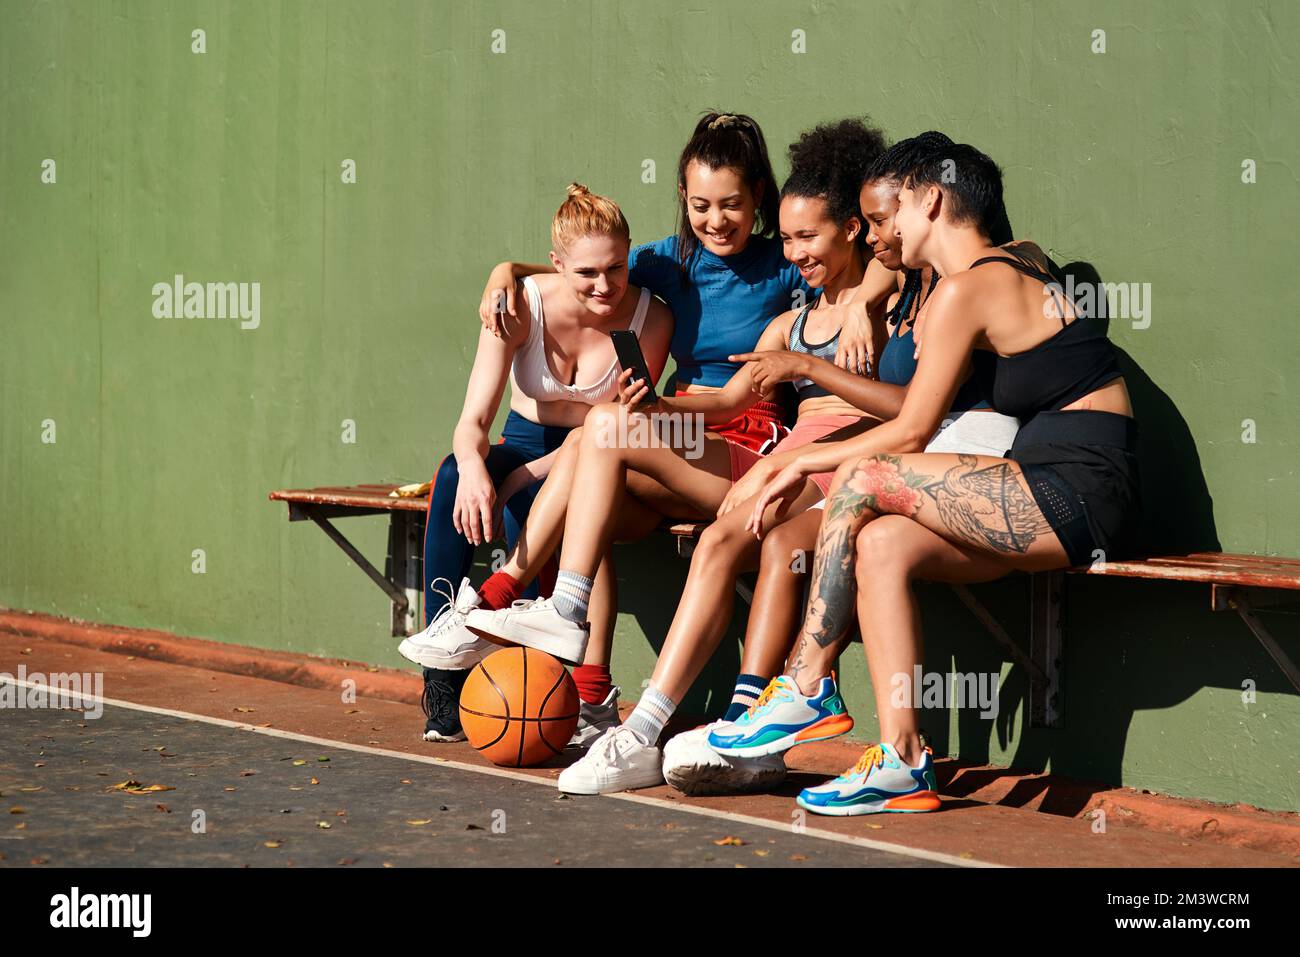 Smile. a diverse group of sportswomen sitting together after playing basketball and looking at a cellphone. Stock Photo